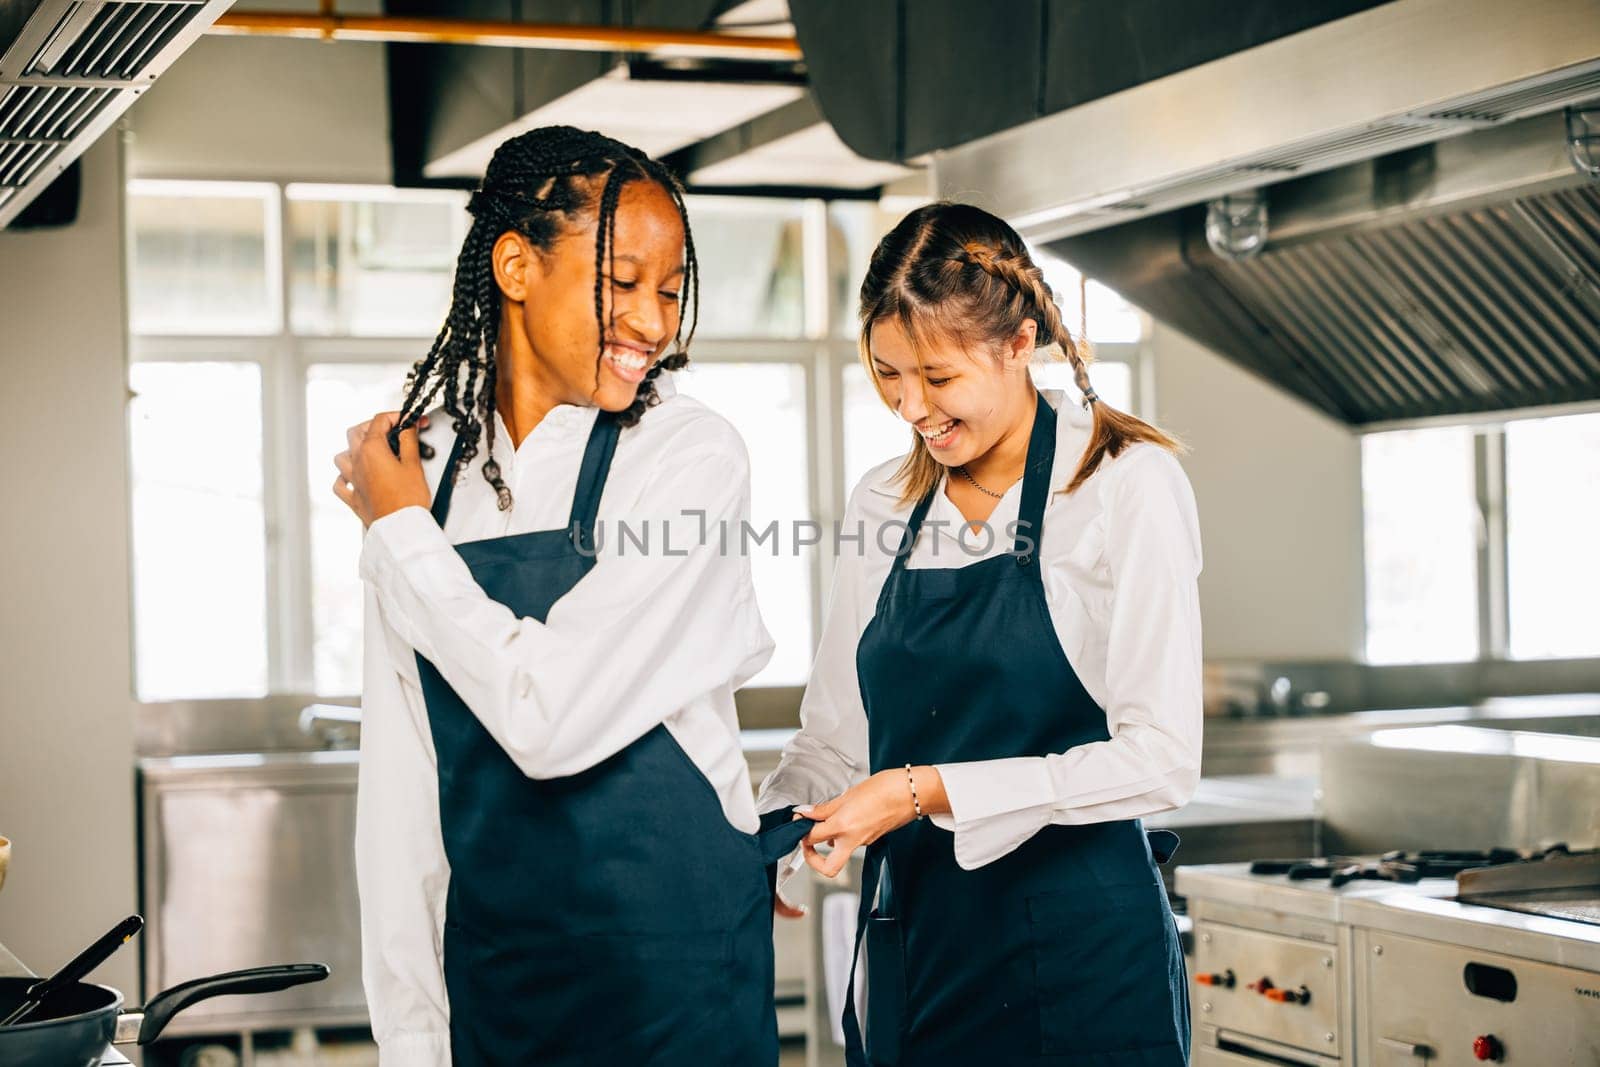 Girlfriend chef aids woman friend tie apron in a restaurant kitchen. Two adults in uniform prepare for food education and service in a professional setting.